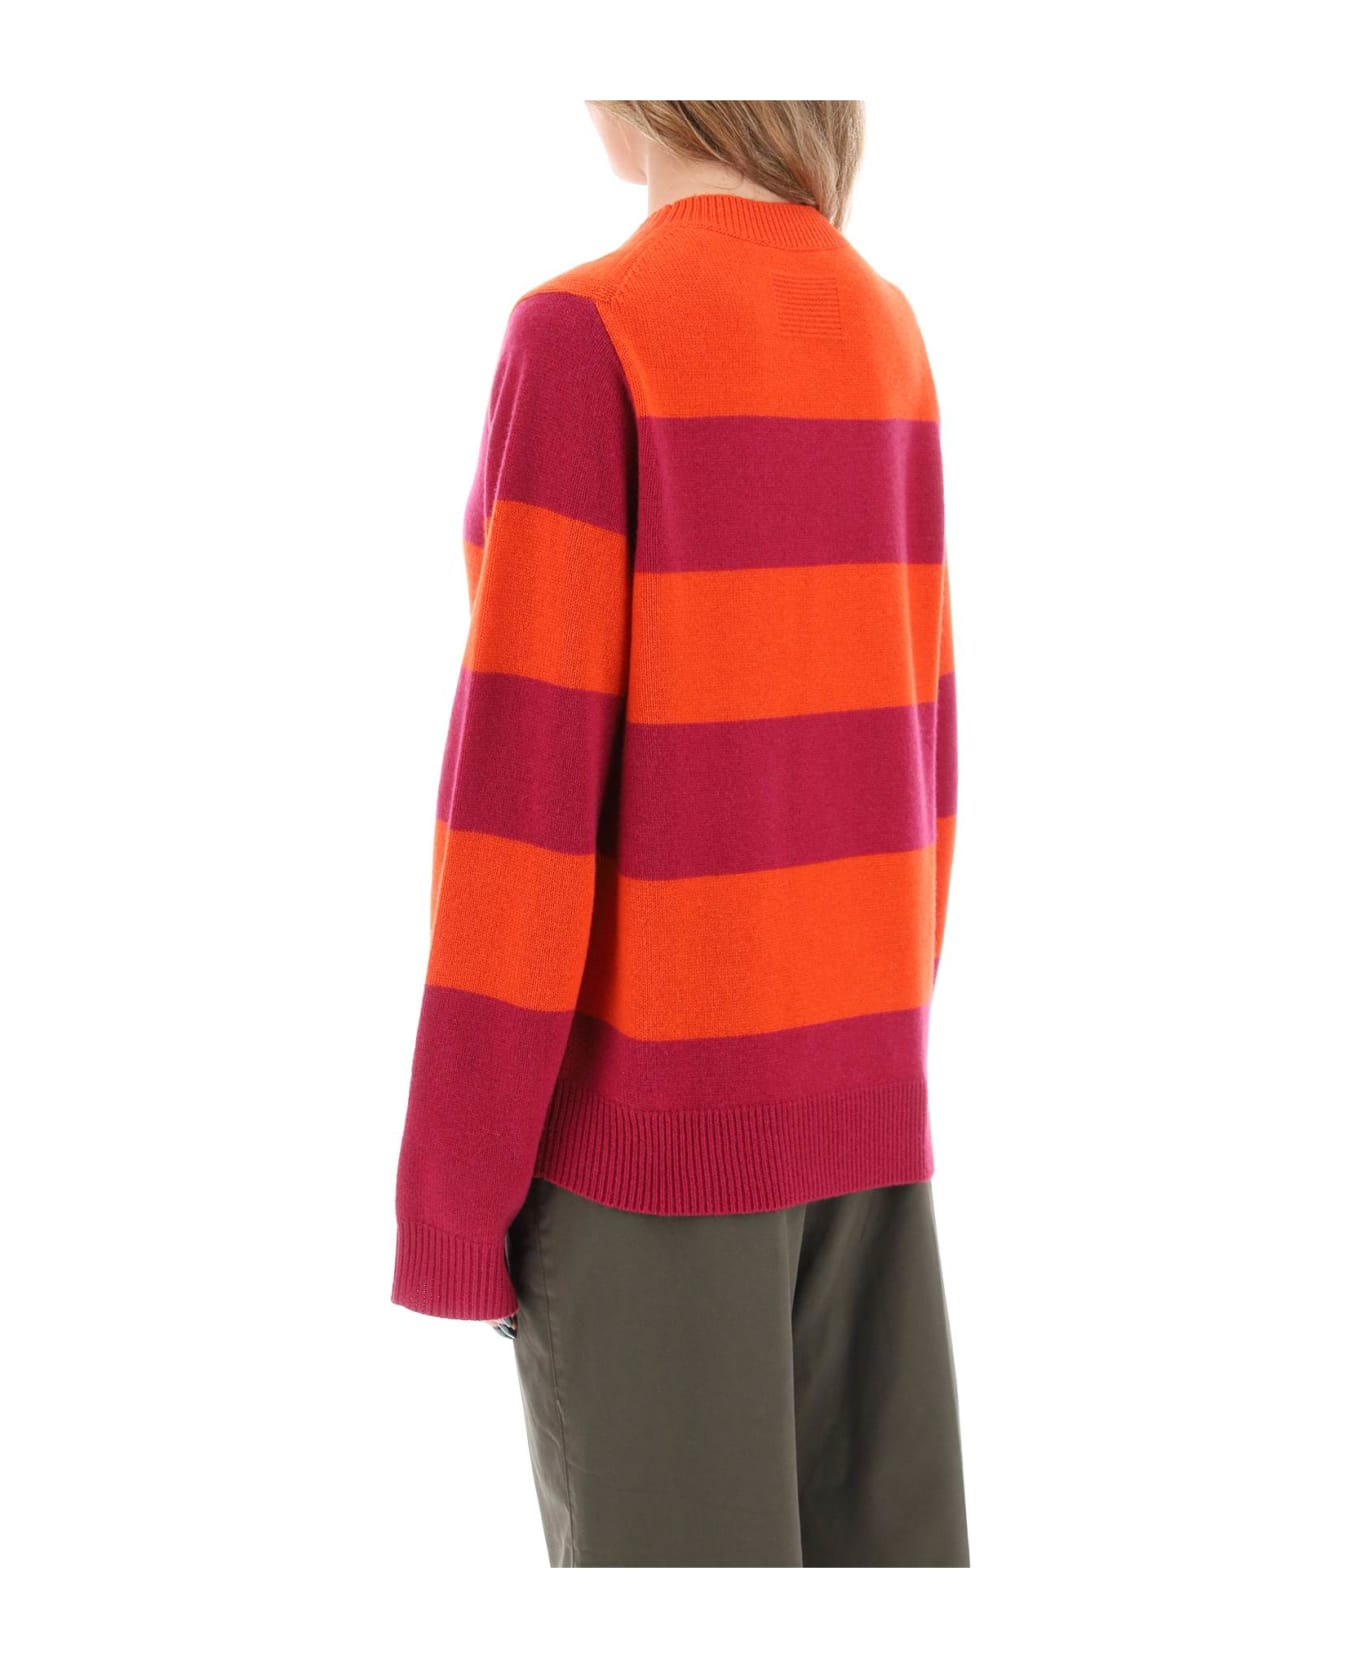 Guest in Residence Striped Cashmere Sweater - MAGENTA CHERRY (Red)